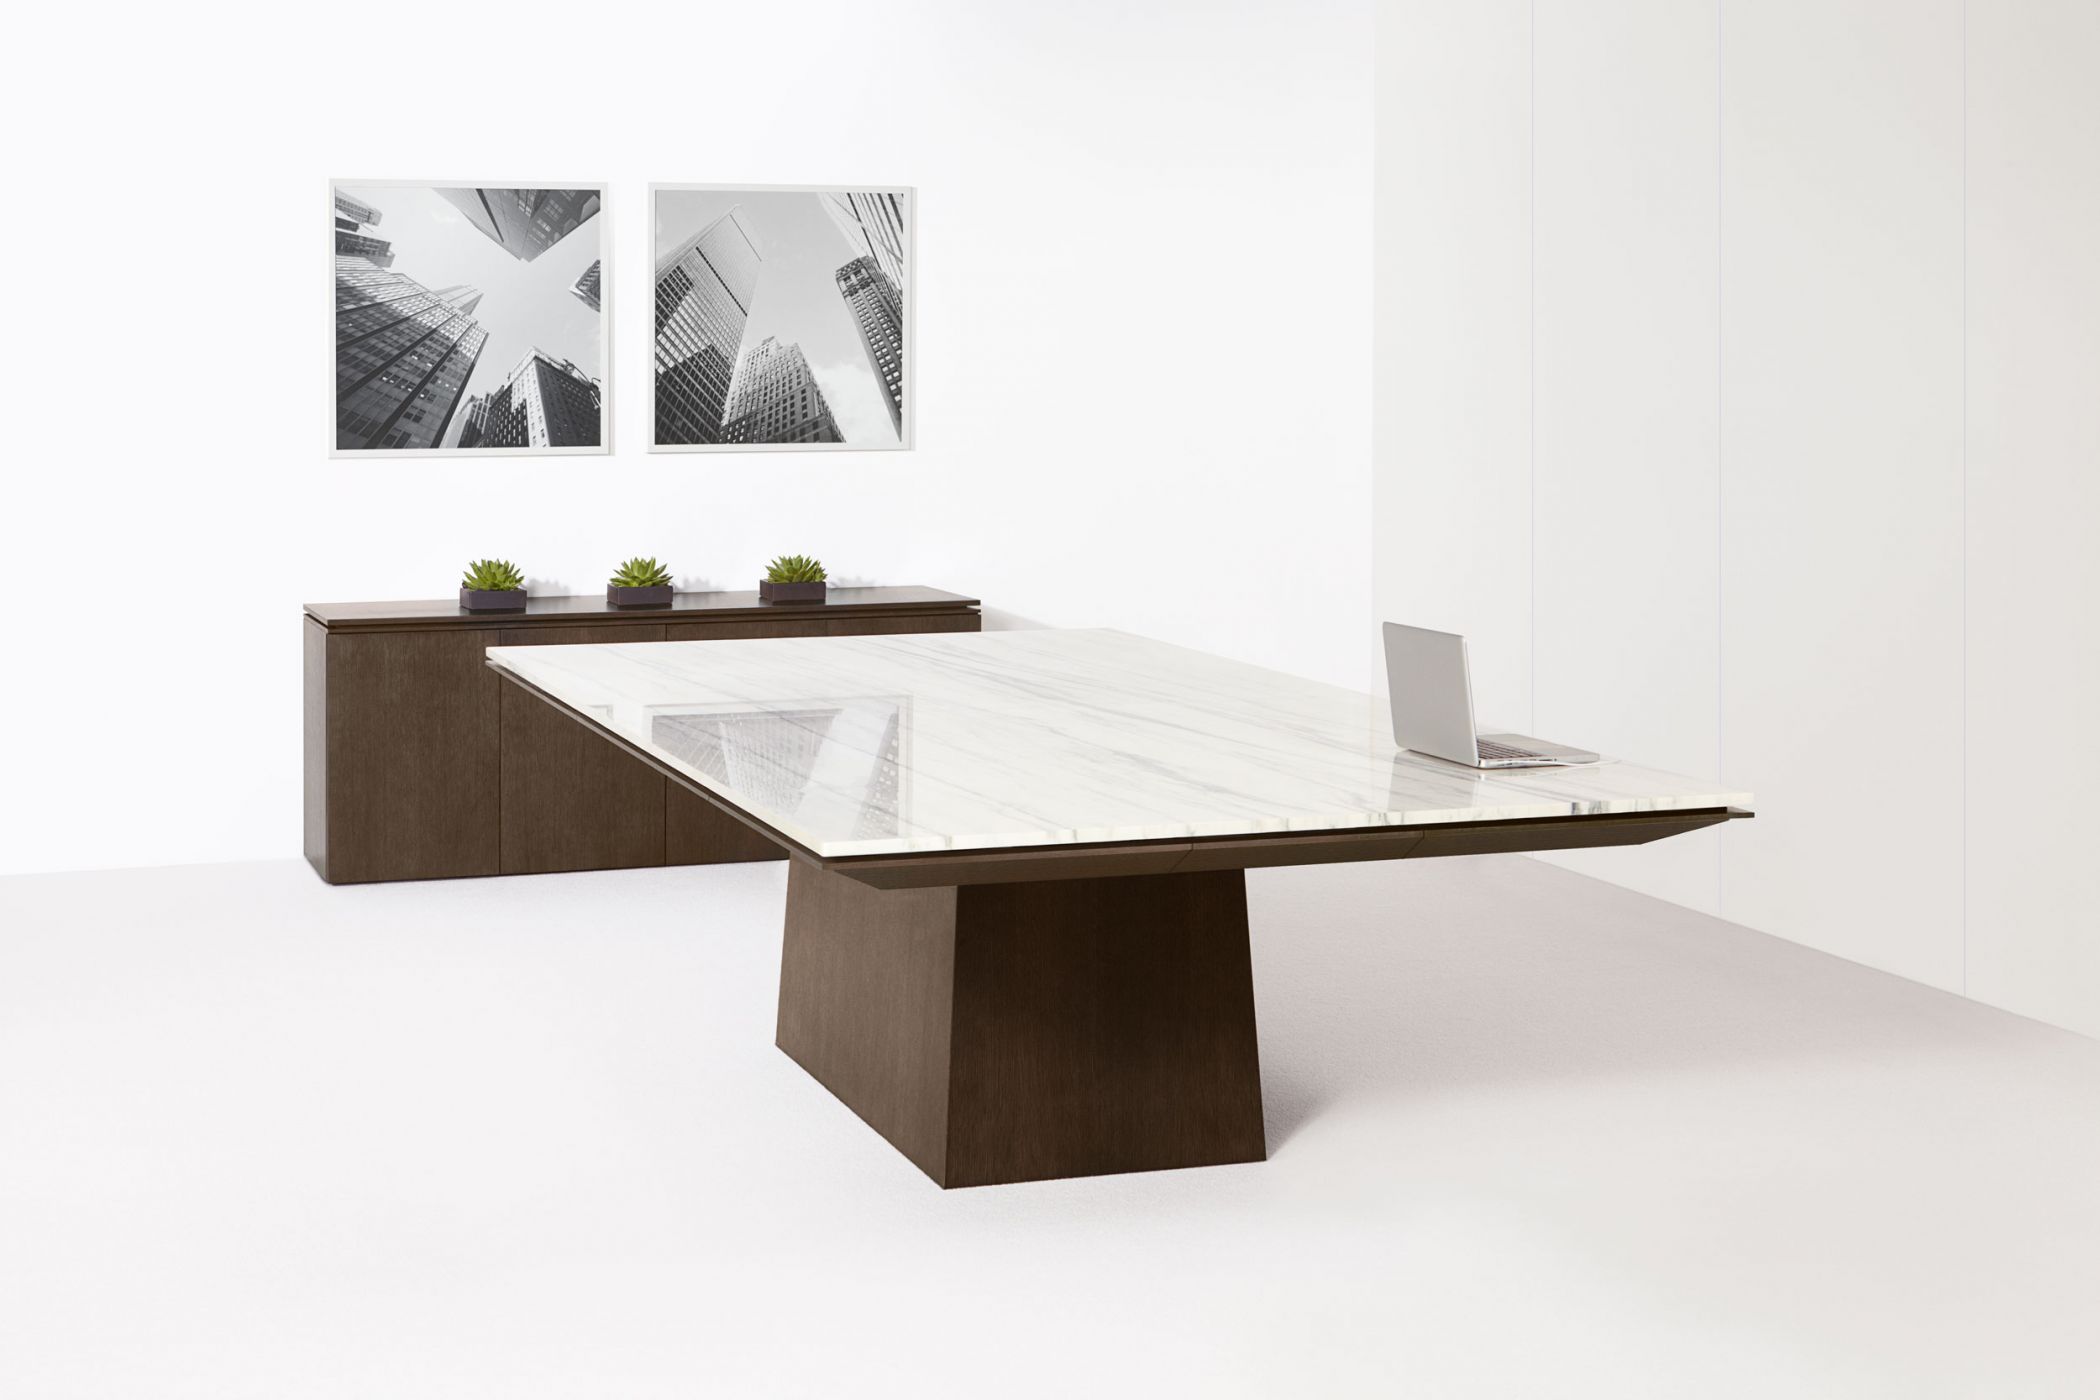 Mesa's design allows surface materials to display cleanly and beautifully.